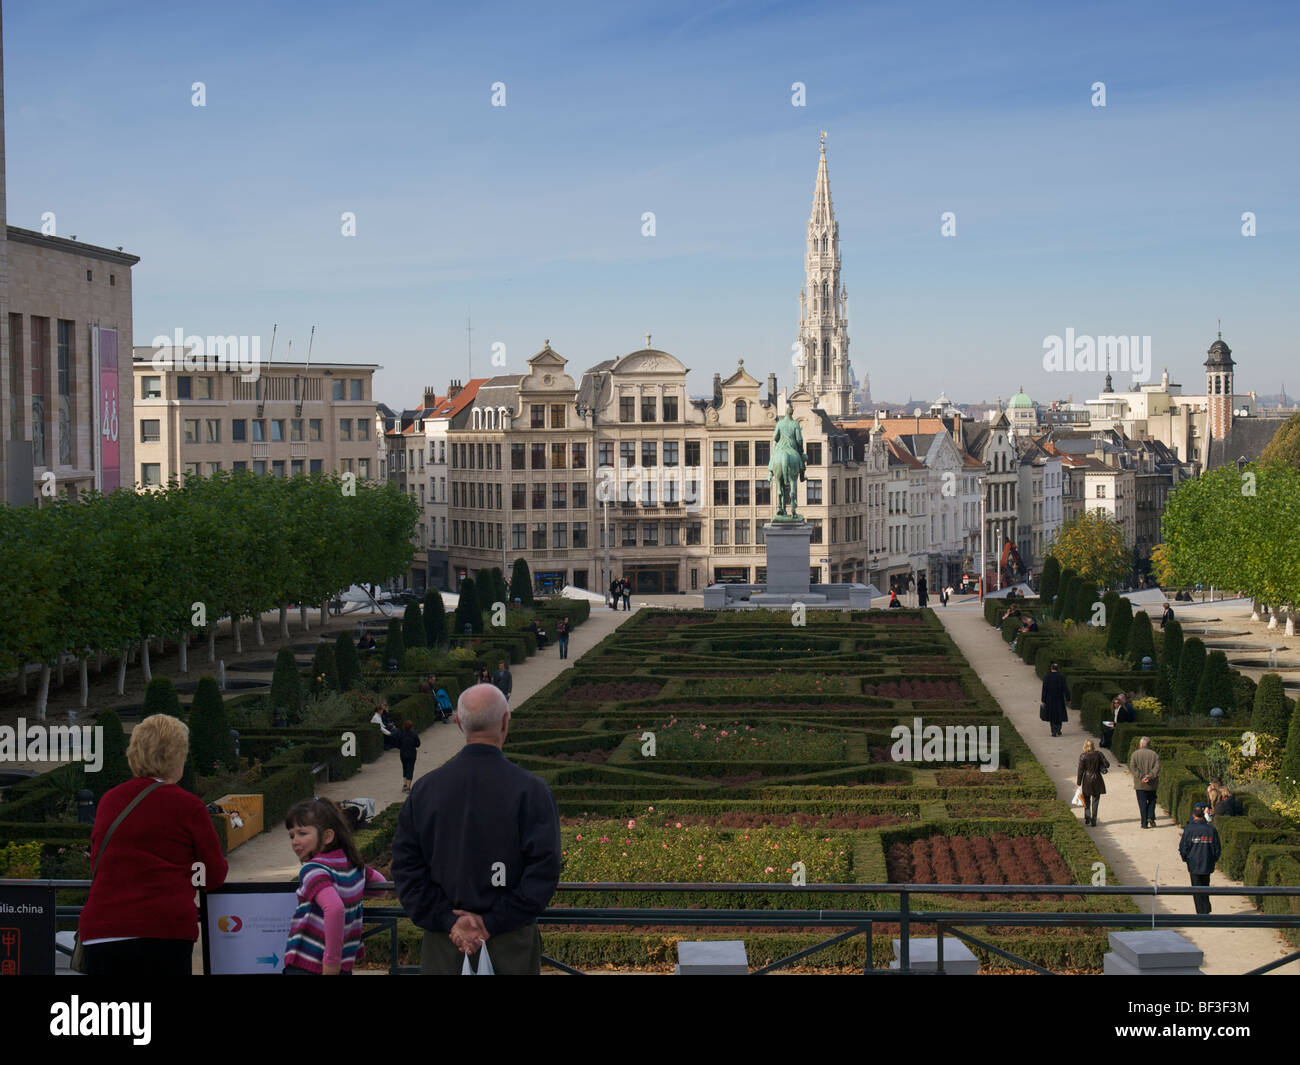 Kunstberg or Mont des Arts with the city centre in the background, Brussels, Belgium Stock Photo